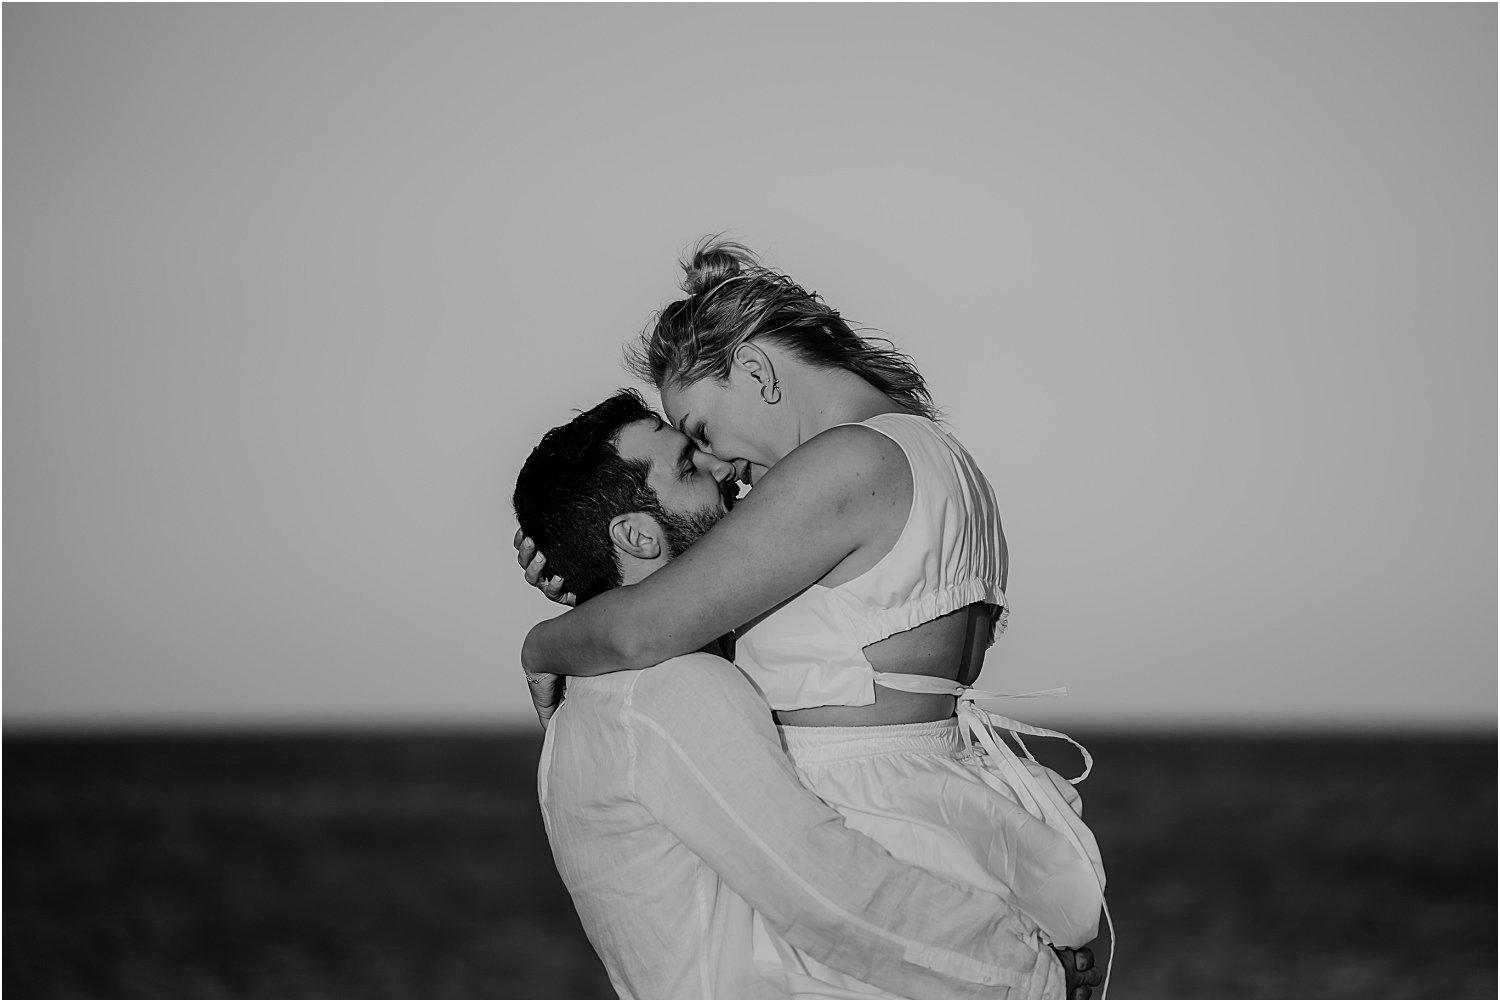 A black and white photo of a couple hugging on the beach.